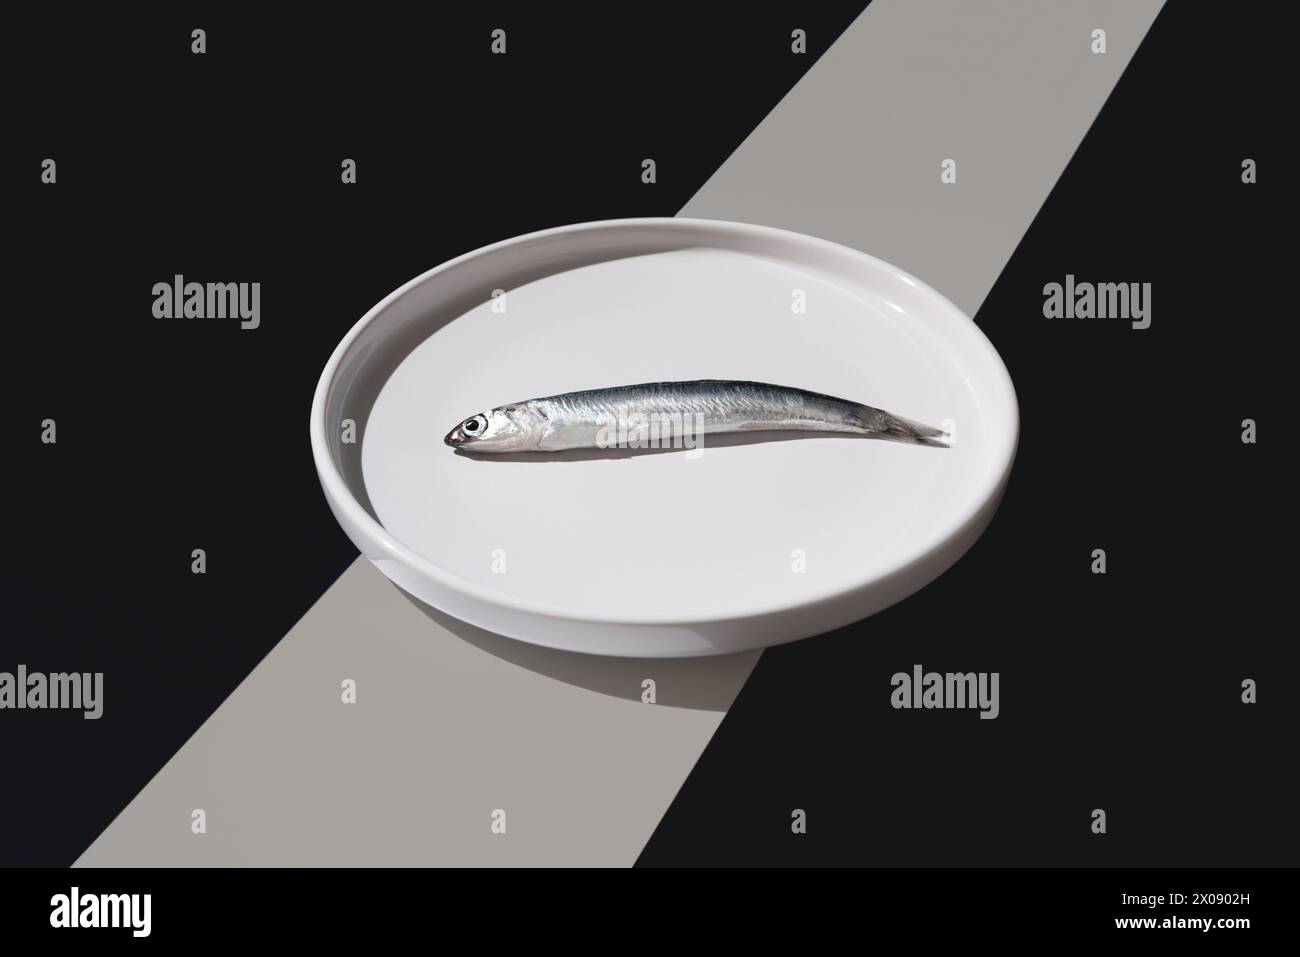 A single anchovy rests on a pristine white plate, overlaid with striking geometric shadows that create a dynamic contrast Stock Photo